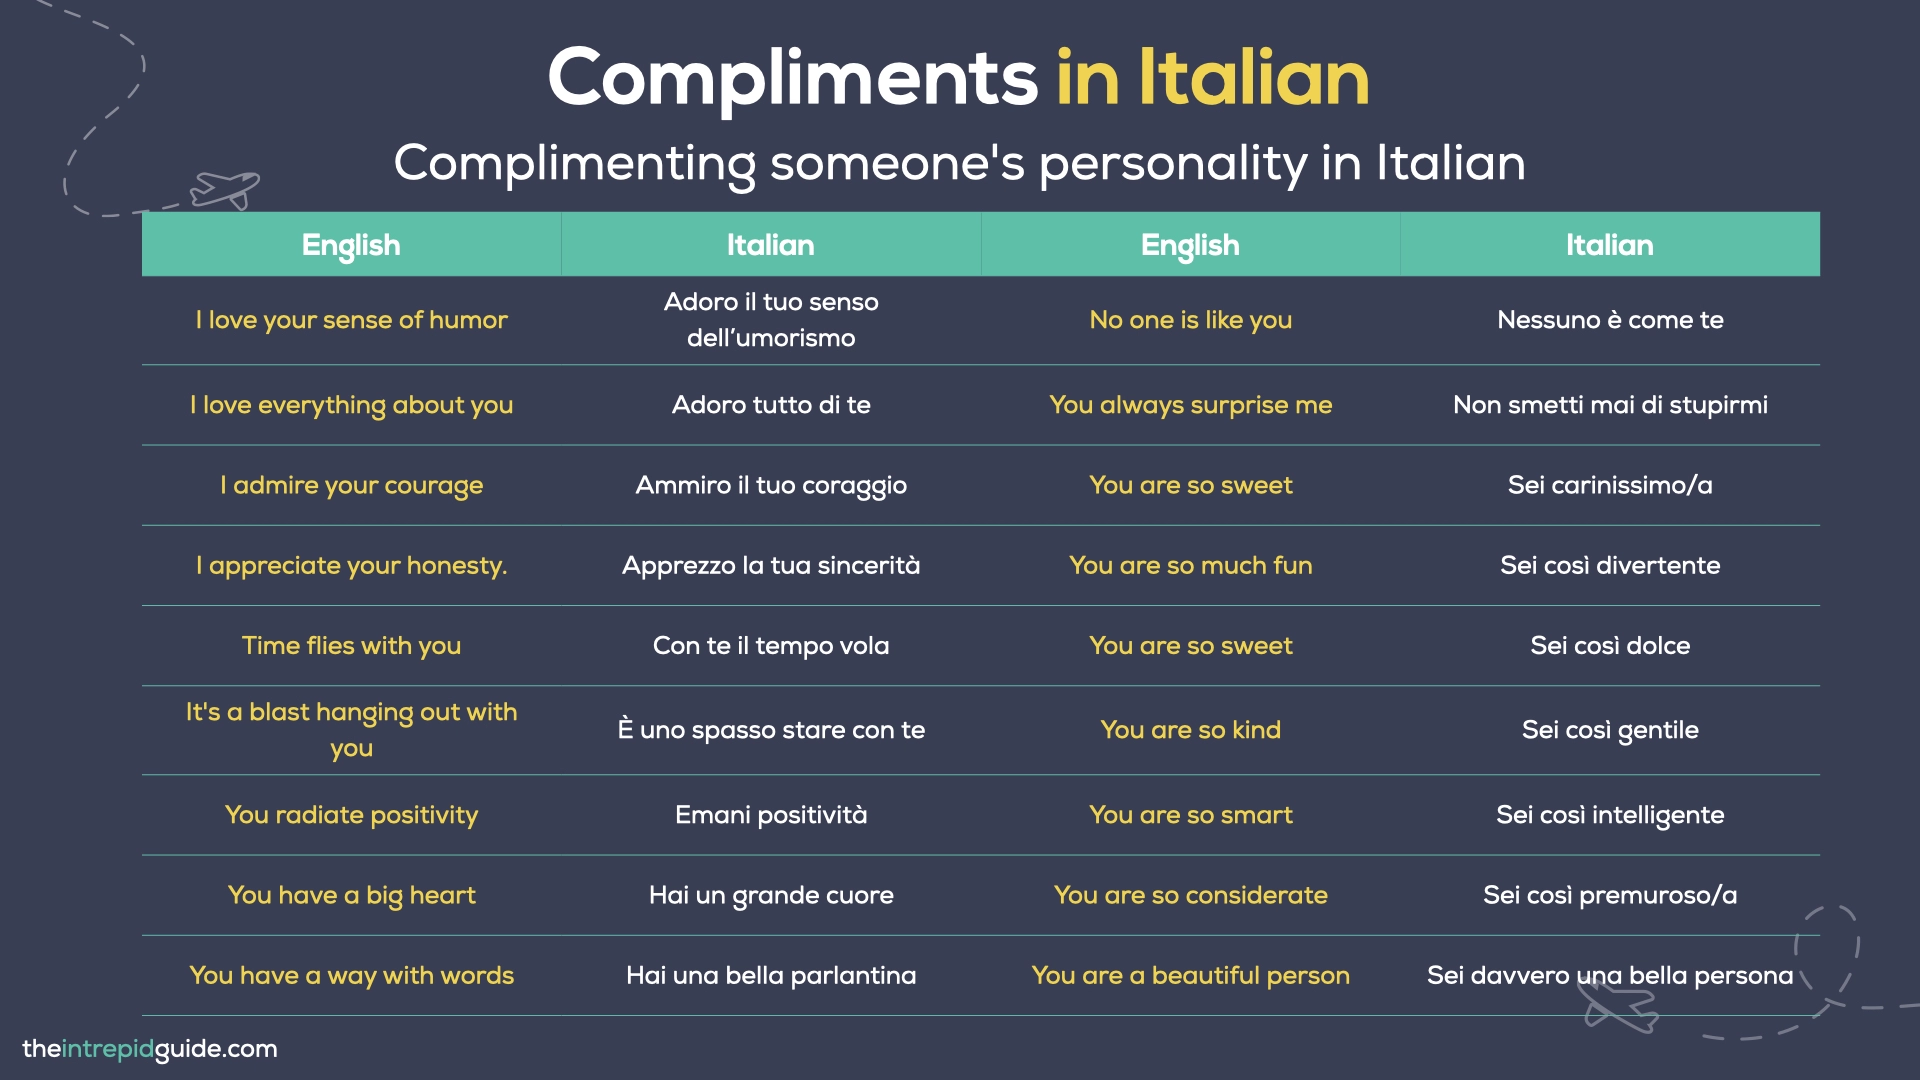 Compliments in Italian - Complimenting someone's personality in Italian